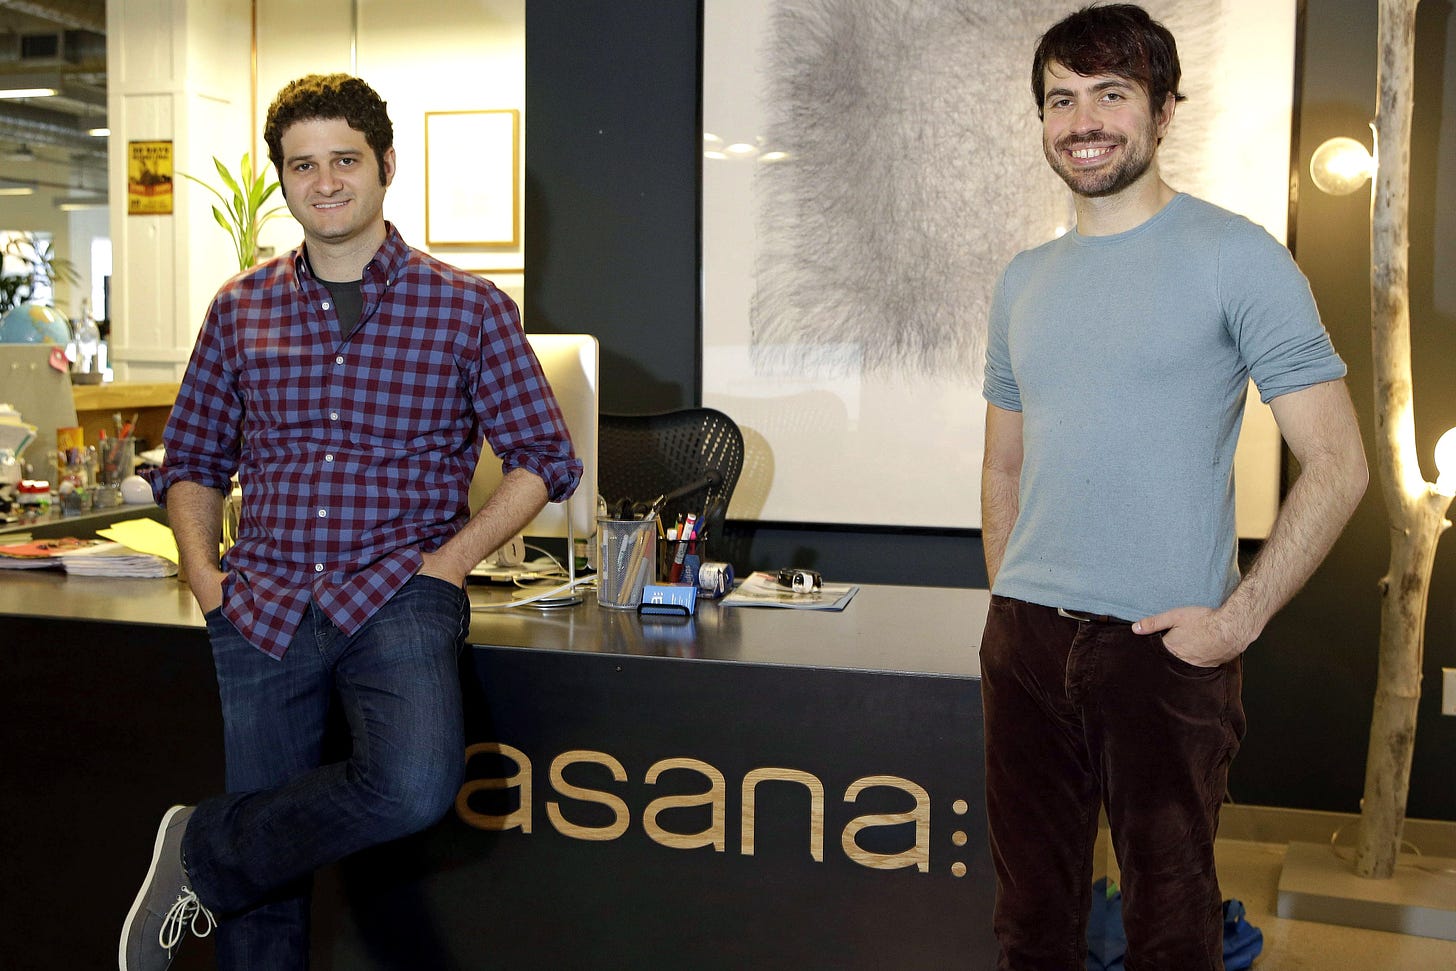 Facebook co-founder plots an escape from email | Employee perks, Asana,  Vision impairment